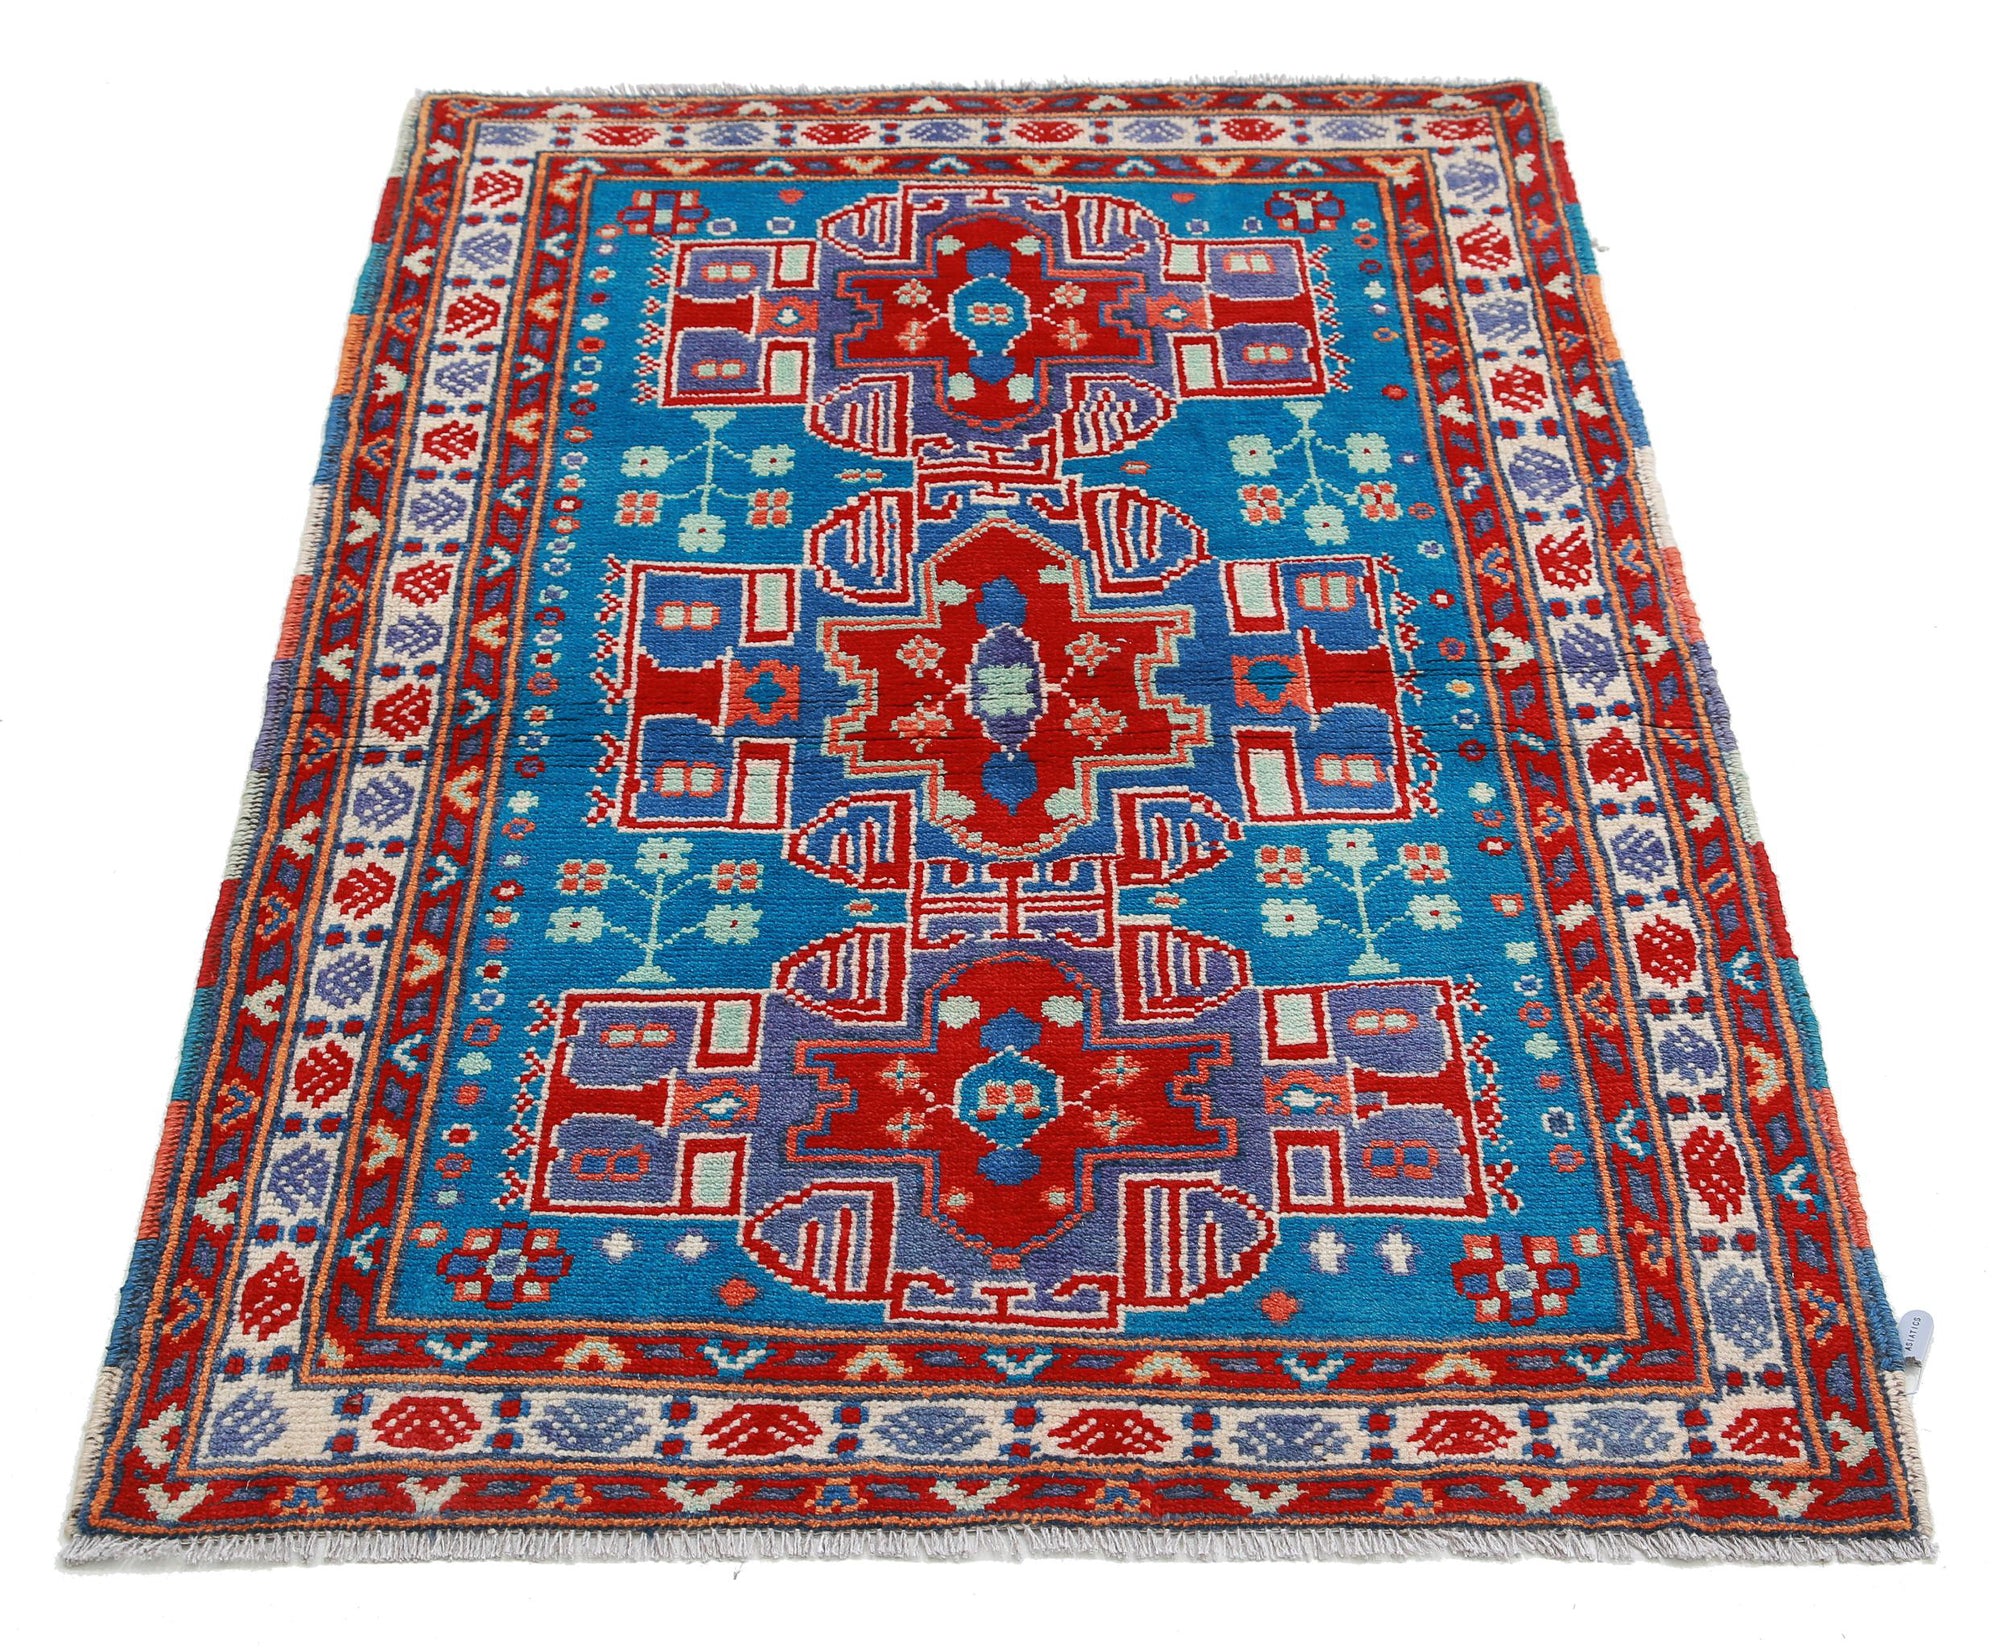 Revival-hand-knotted-qarghani-wool-rug-5014065-3.jpg